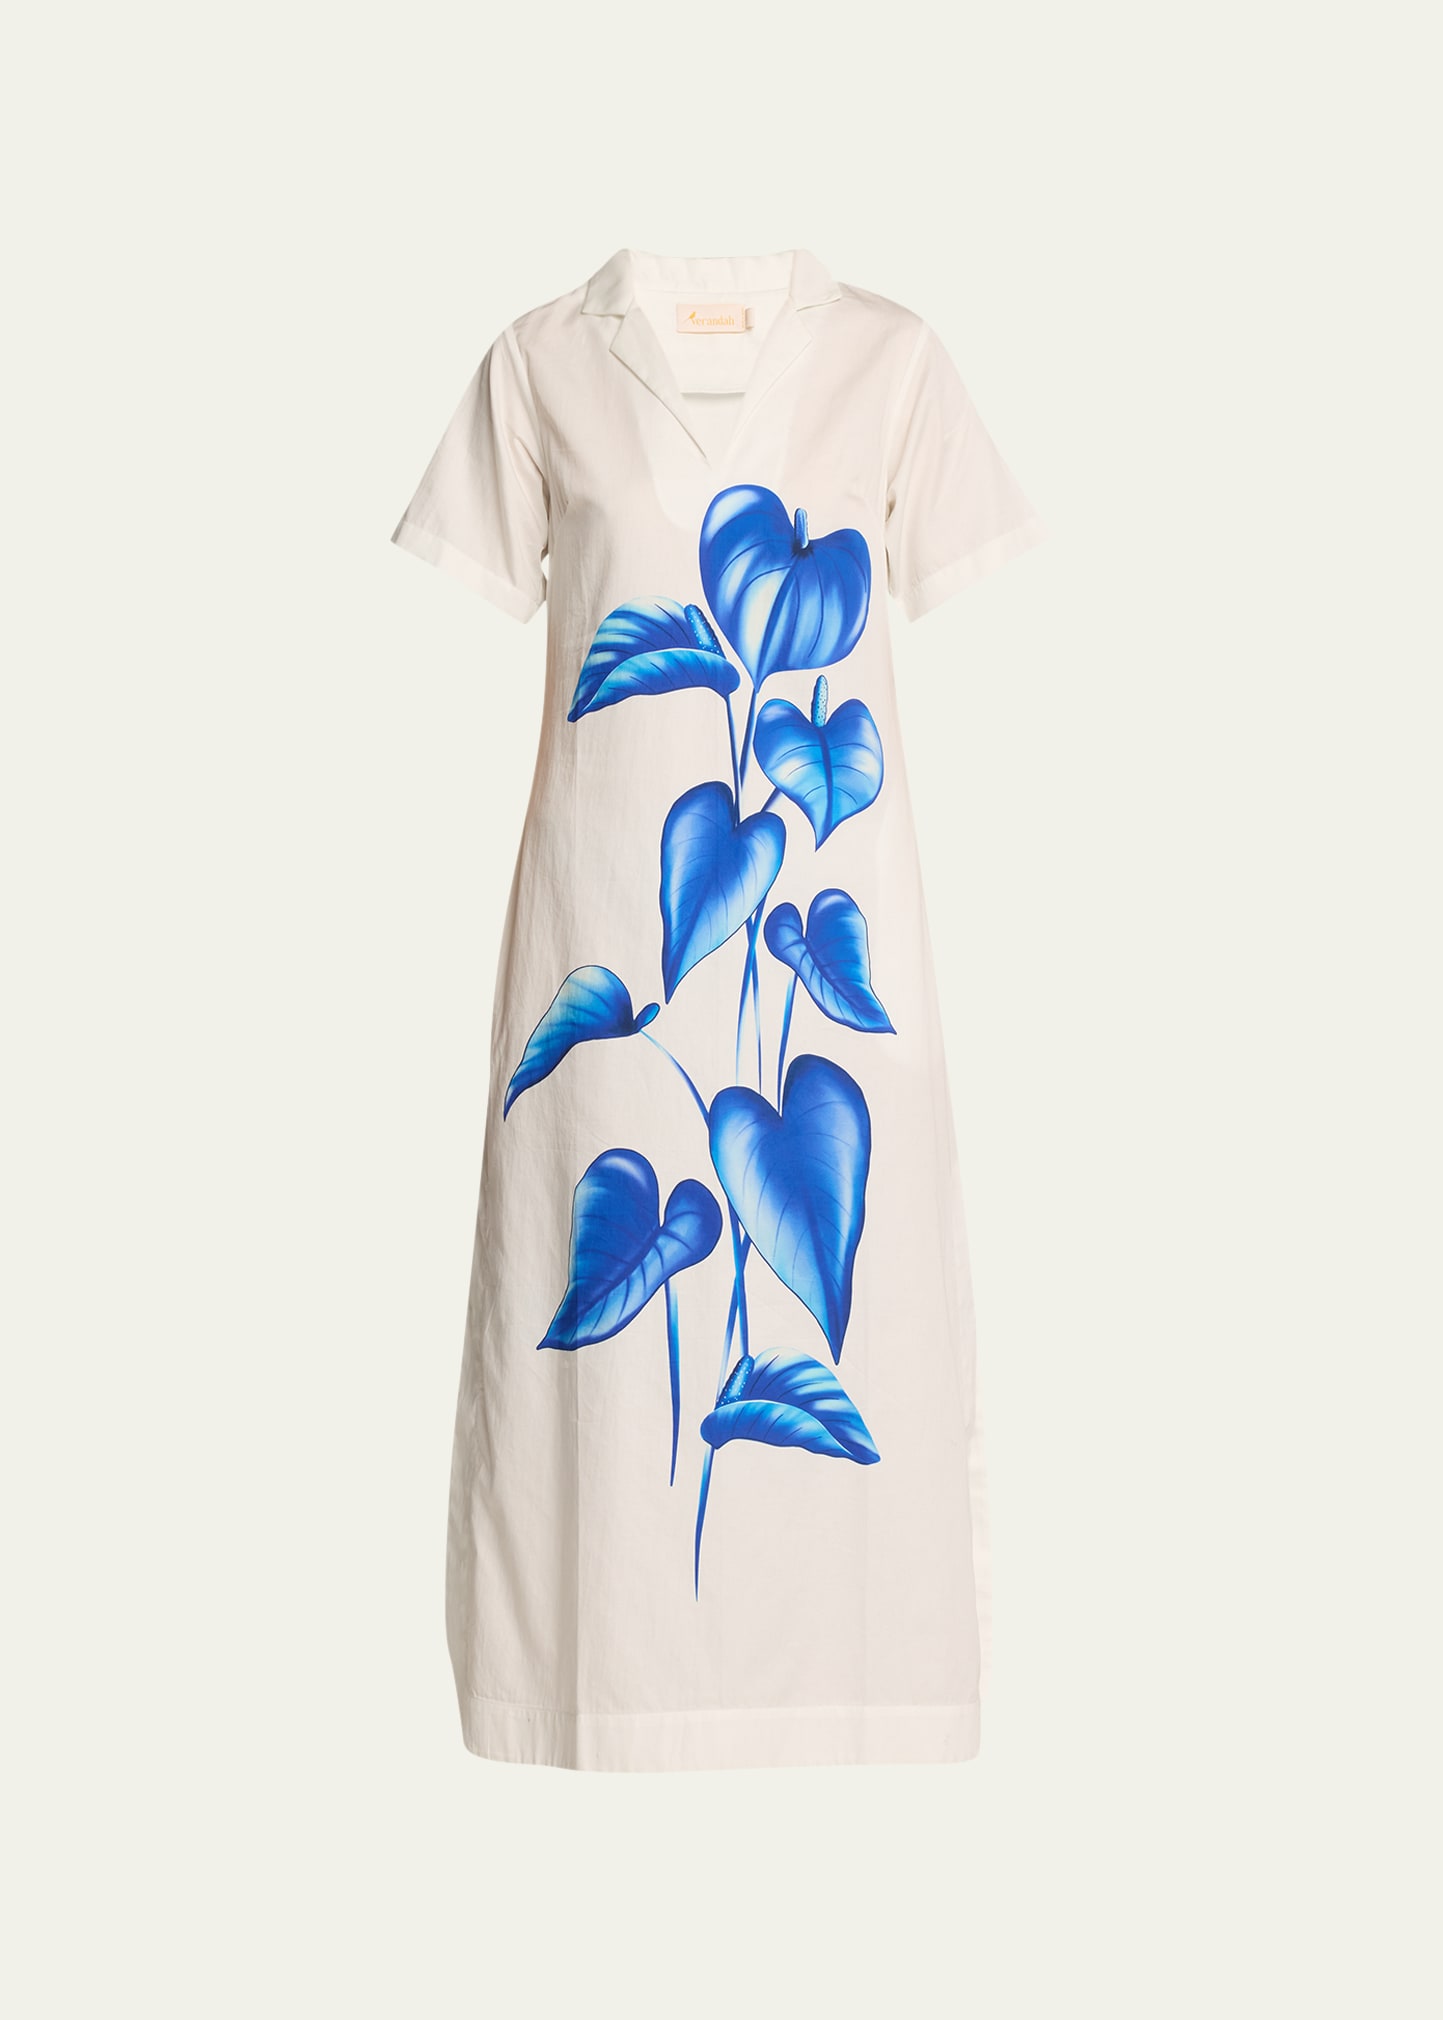 Verandah Peace Lily-printed Shirtdress In Blue And White